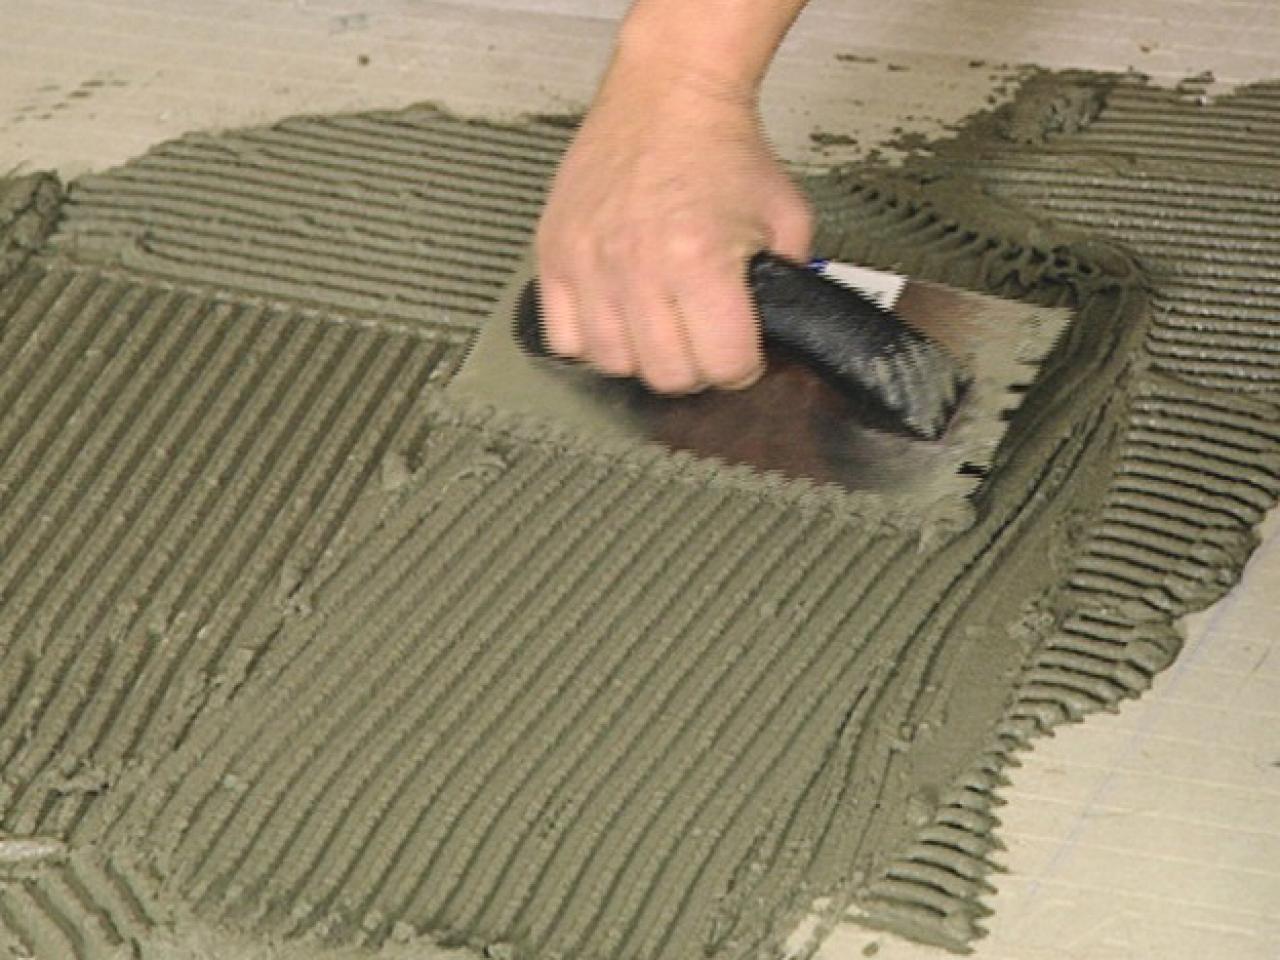 Install Earth Friendly Ceramic Tiles, How To Put Ceramic Tile On The Floor